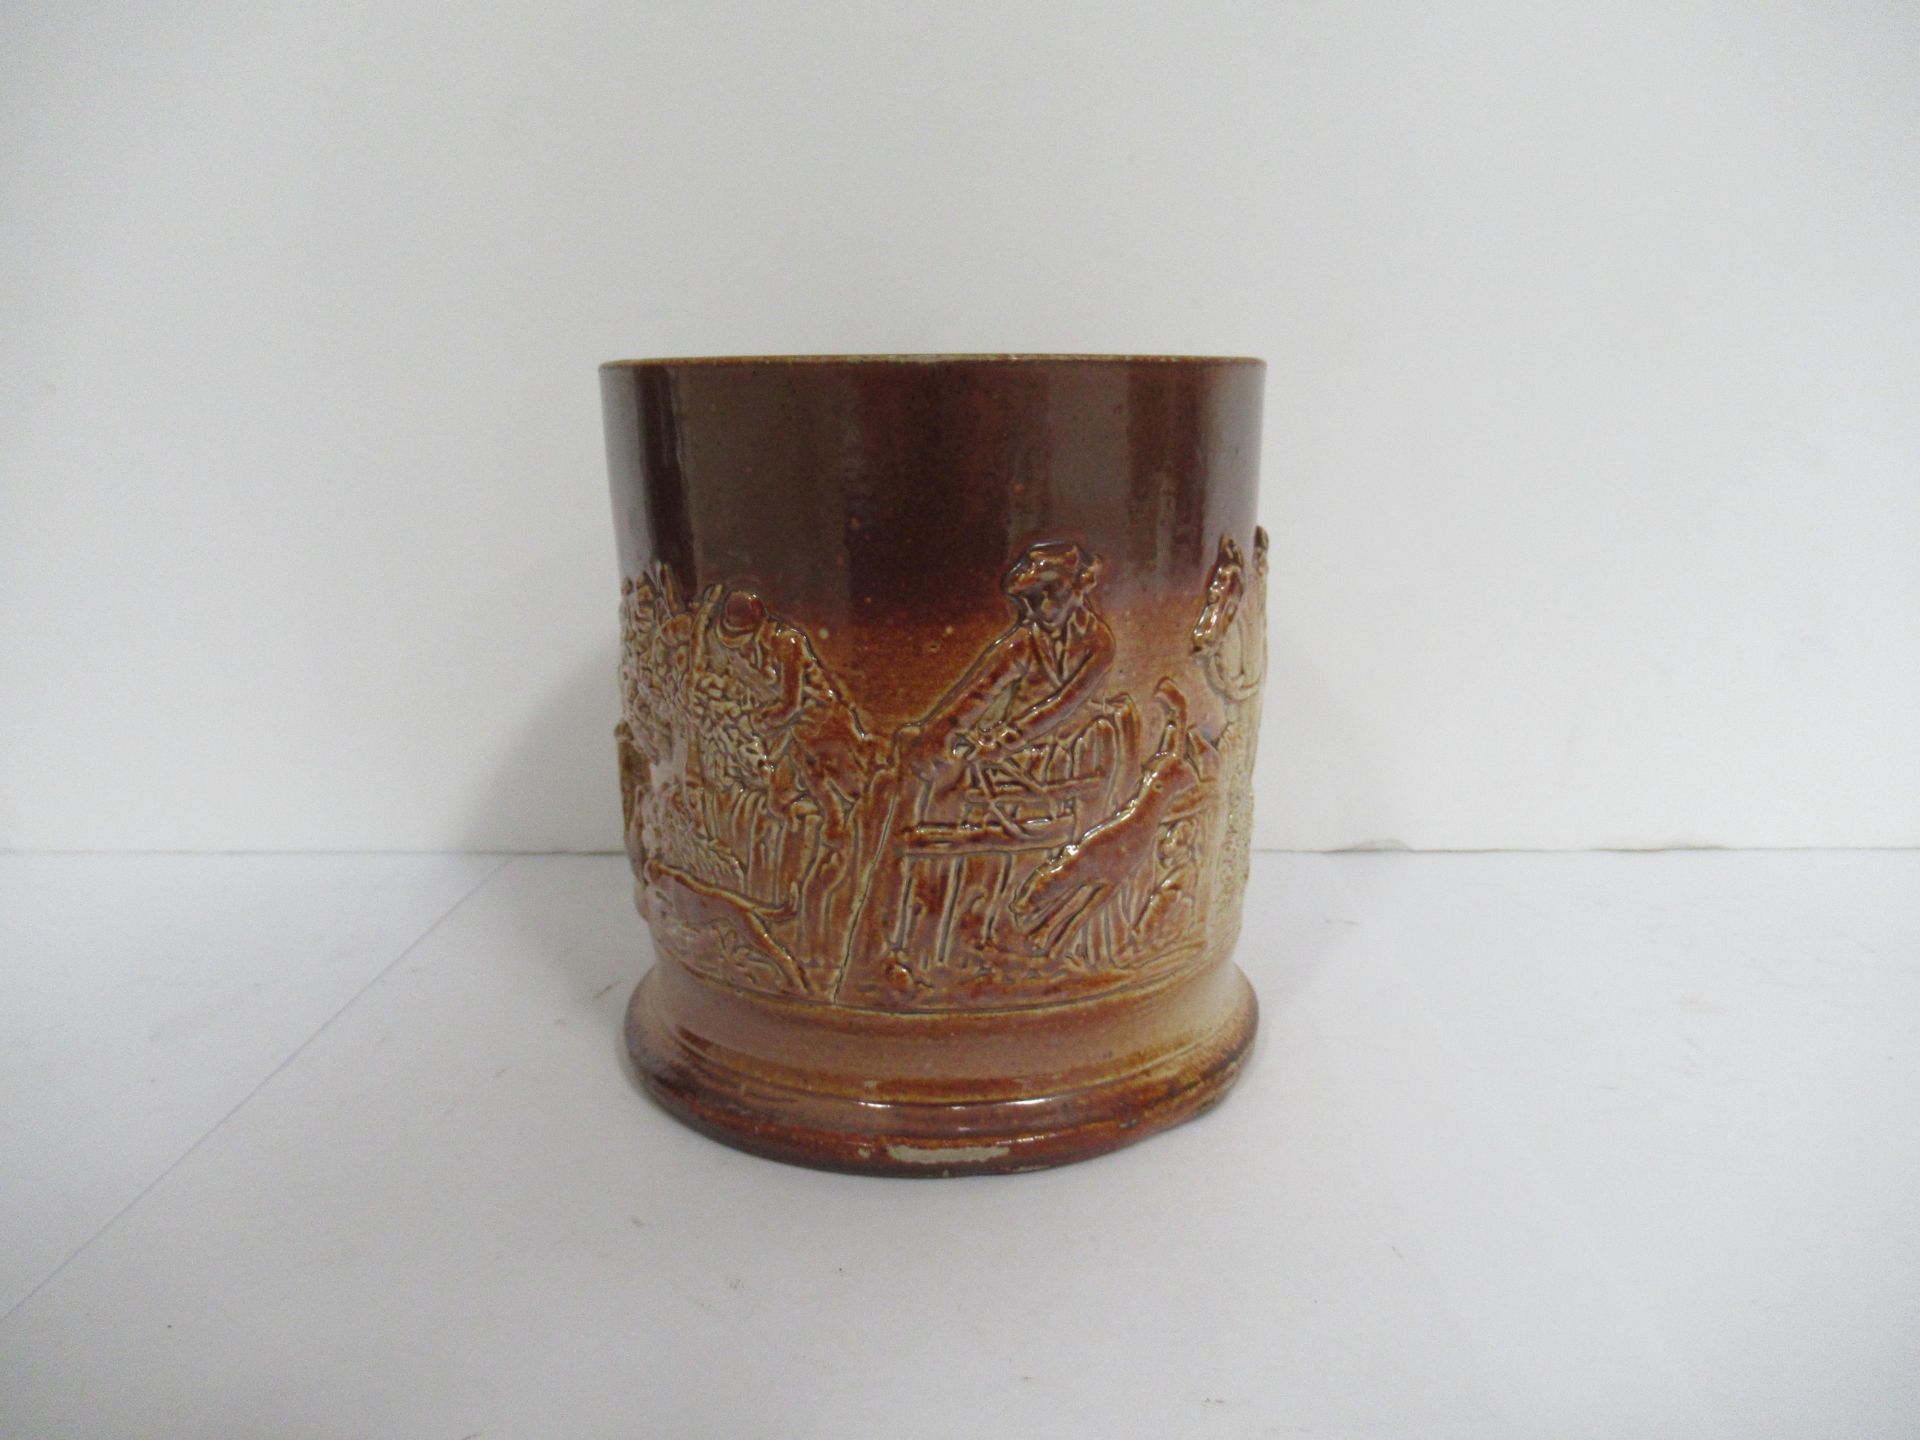 H.Green Humber Bank, Hull stone drinking vessel with greyhound handle - Image 2 of 7